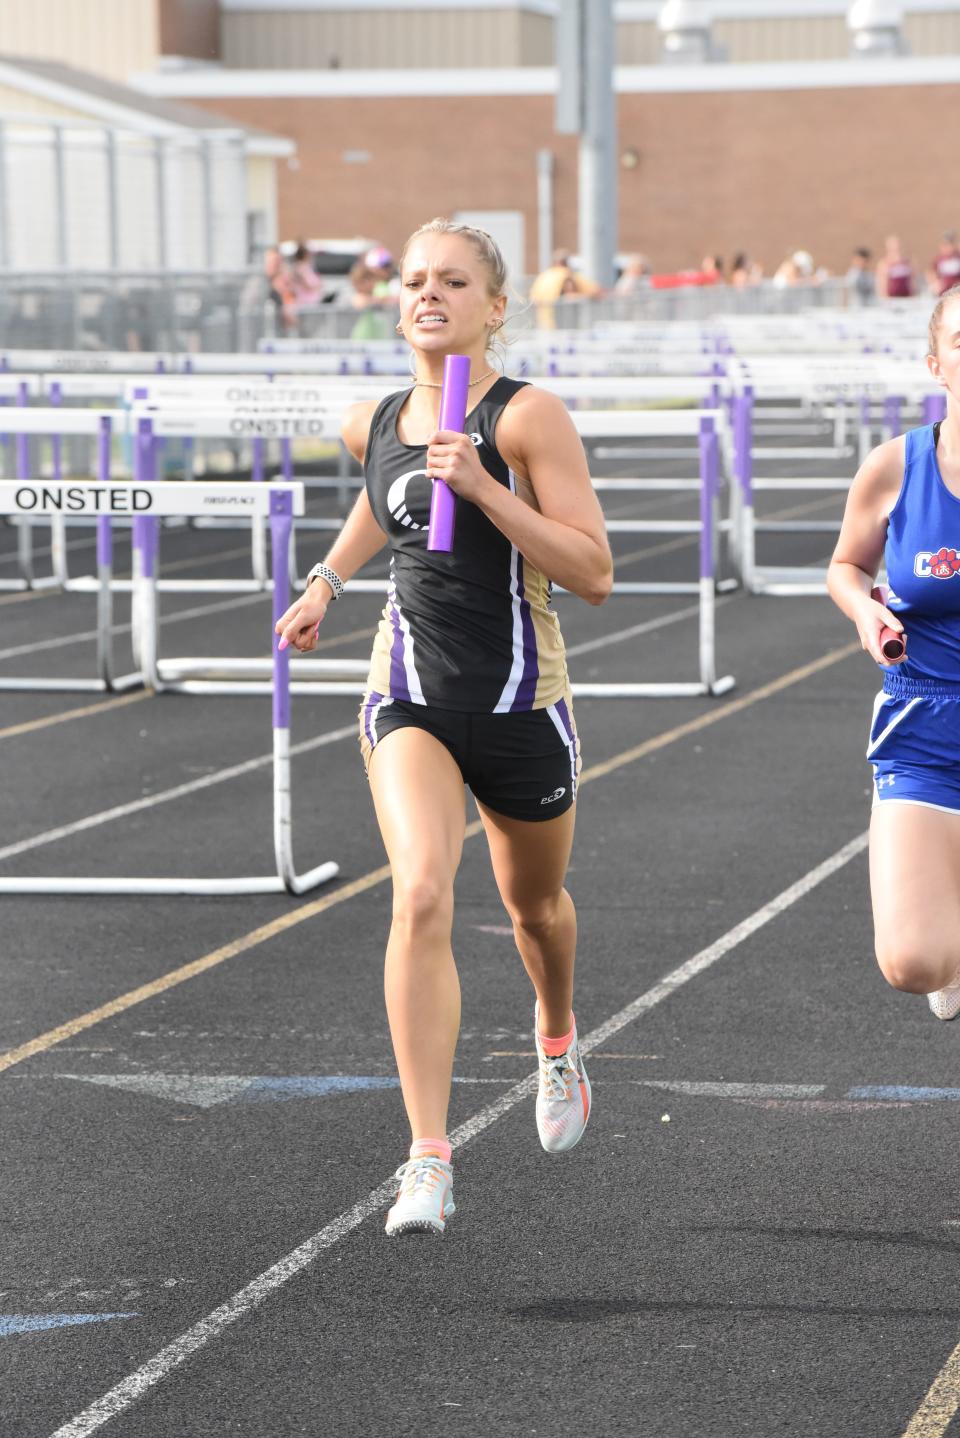 Onsted's Kara Terakedis runs her leg of the 4x800 relay at the Lenawee County Track and Field Championships.